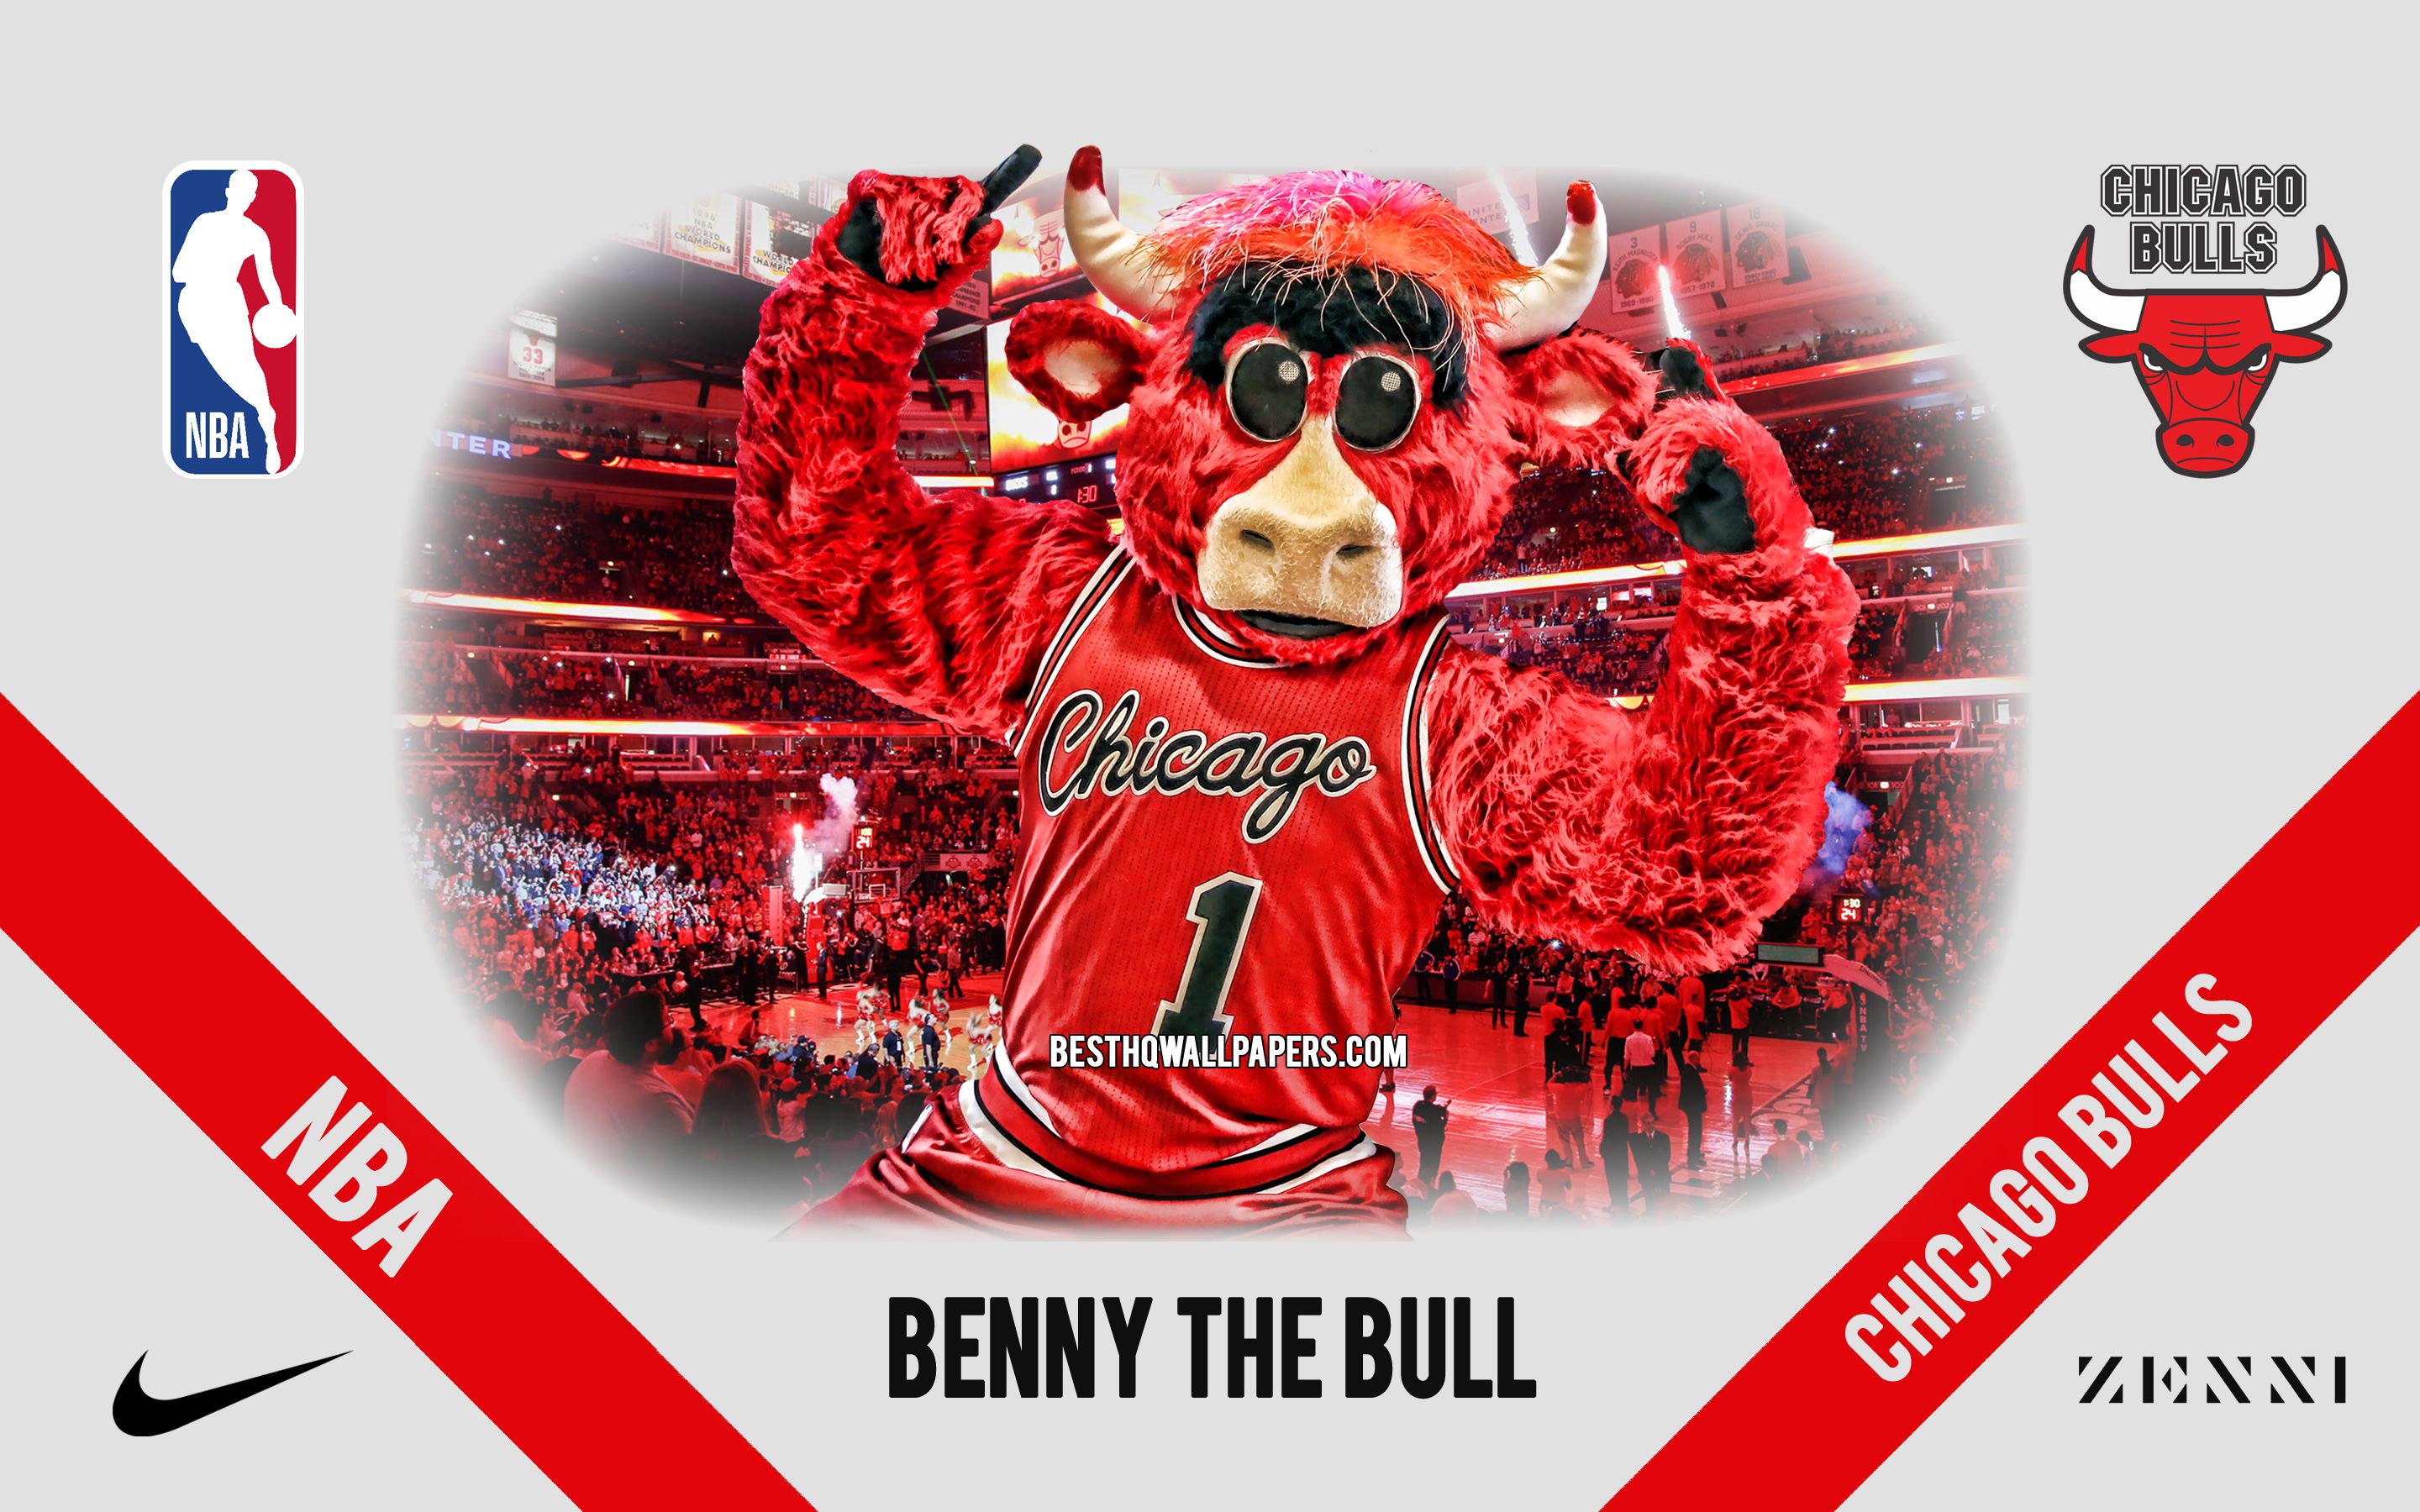 Download wallpaper Benny the Bull, mascot, Chicago Bulls, NBA, portrait, USA, basketball, Benny, Chicago Bulls mascot, United Center, Chicago Bulls logo for desktop with resolution 2880x1800. High Quality HD picture wallpaper